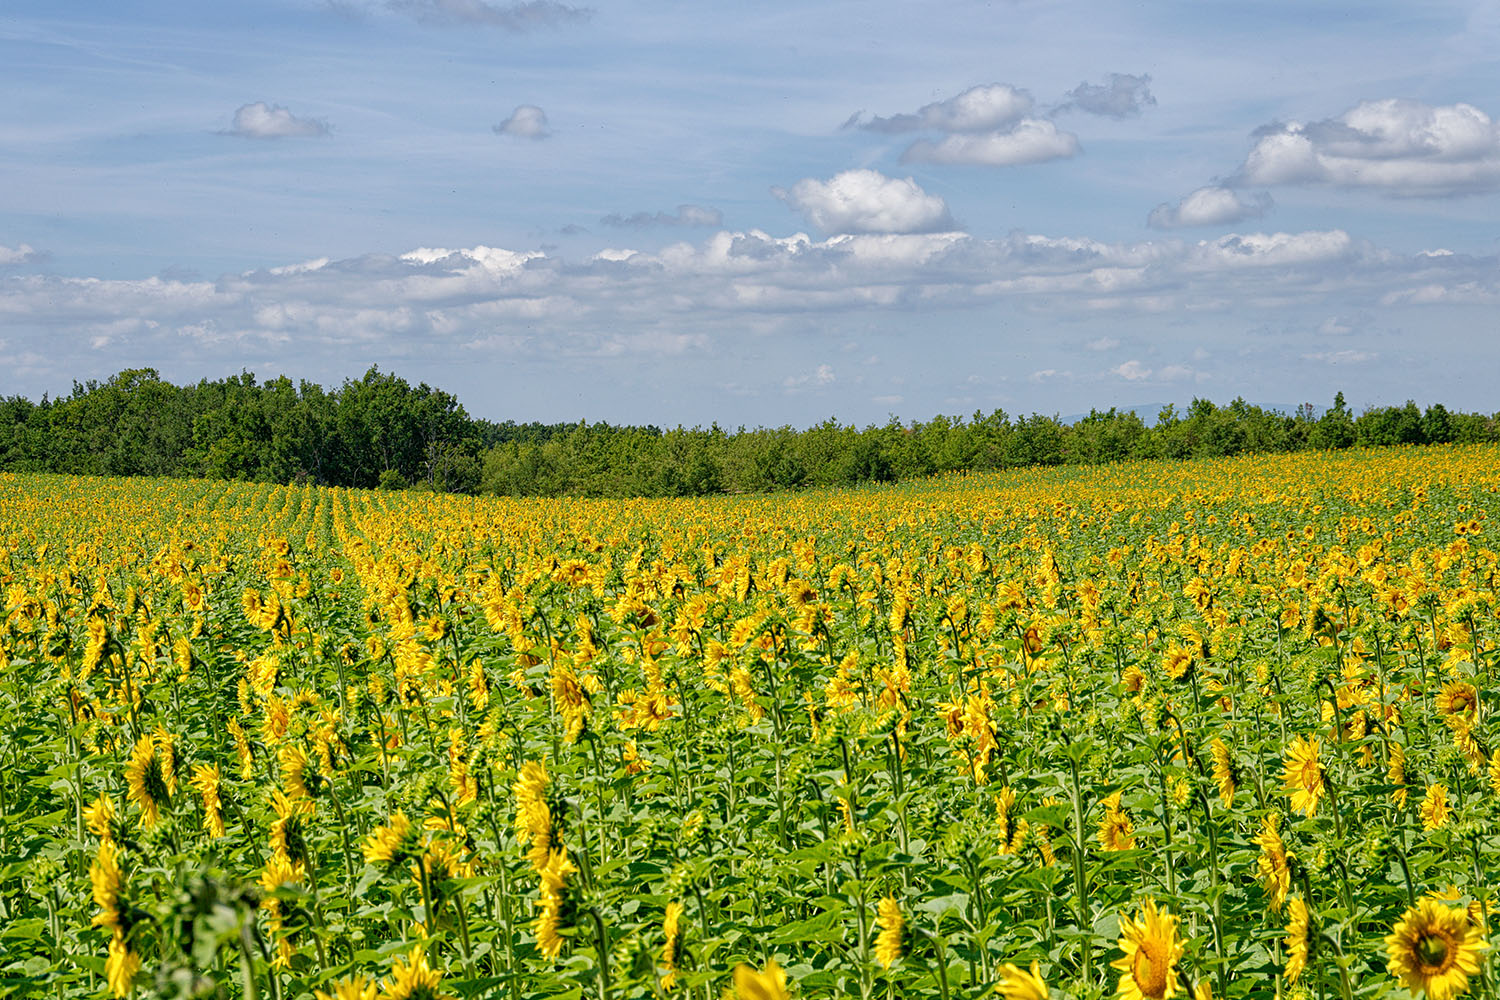 ...I just couldn't pass by some of these truly enormous sunflower fields.